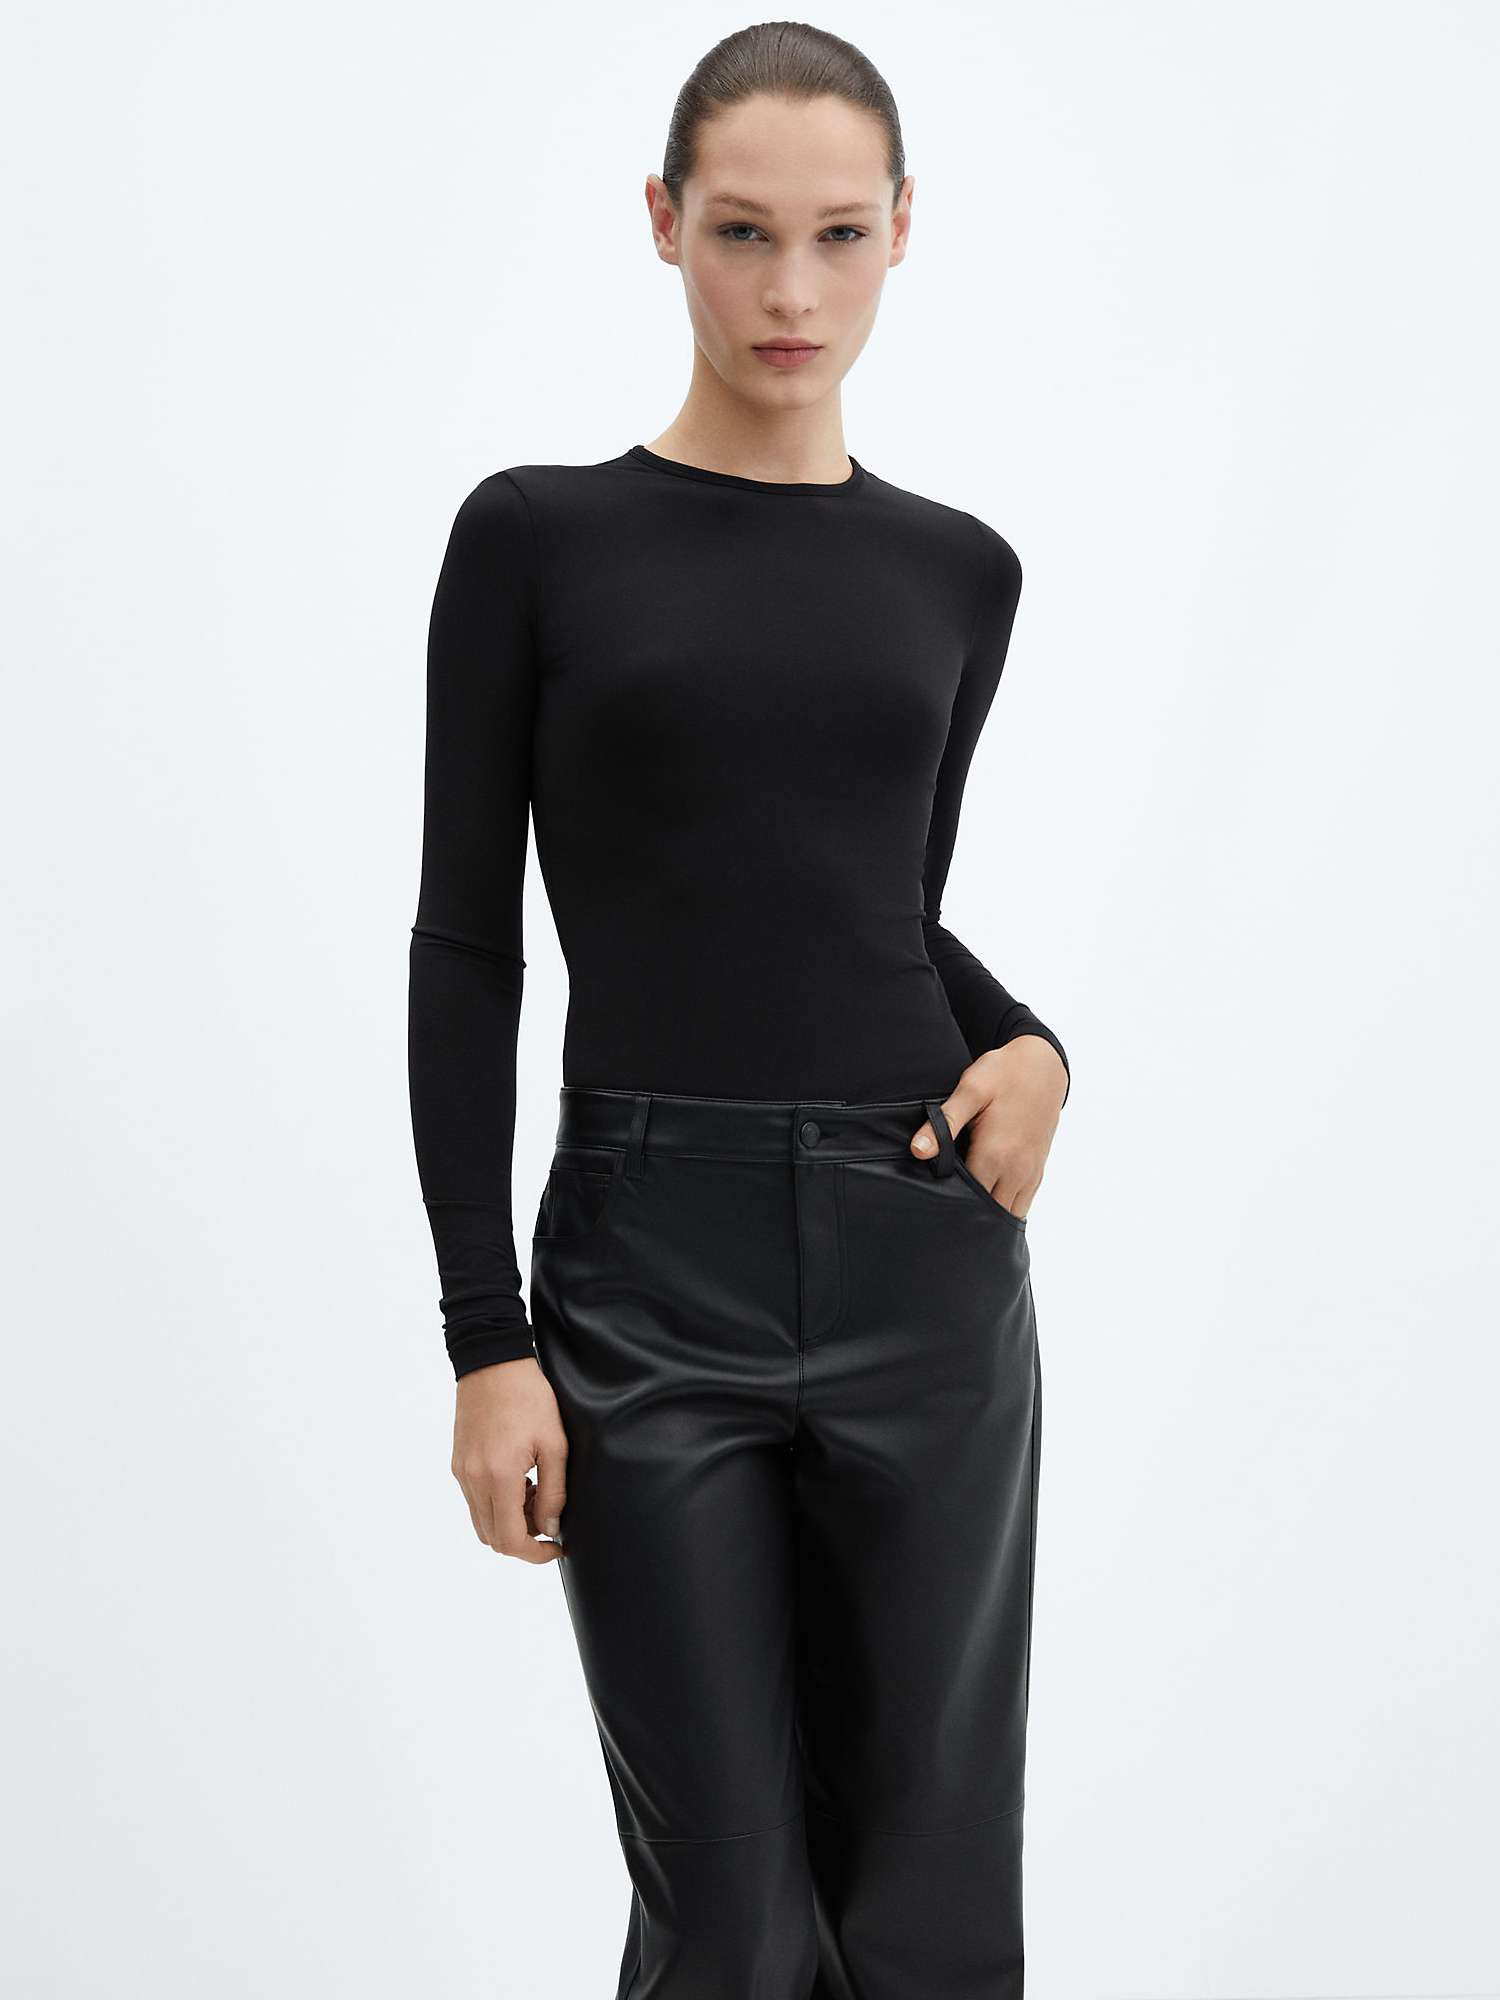 Buy Mango Faux Leather High Waist Trousers, Black Online at johnlewis.com